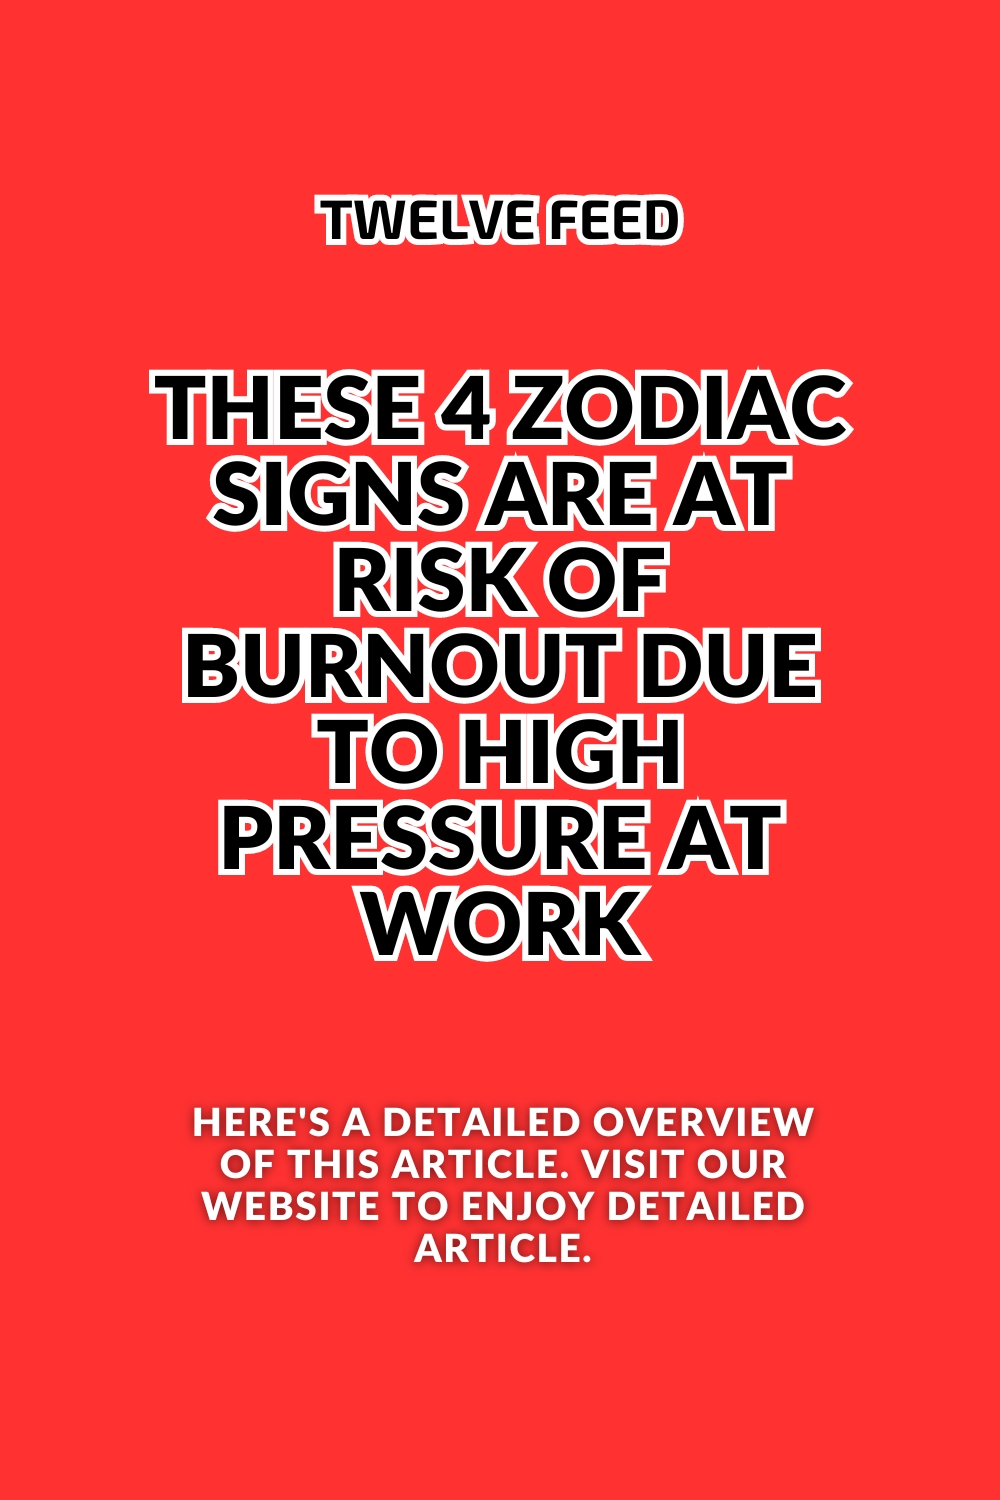 4 Zodiac Signs Are At Risk Of Burnout